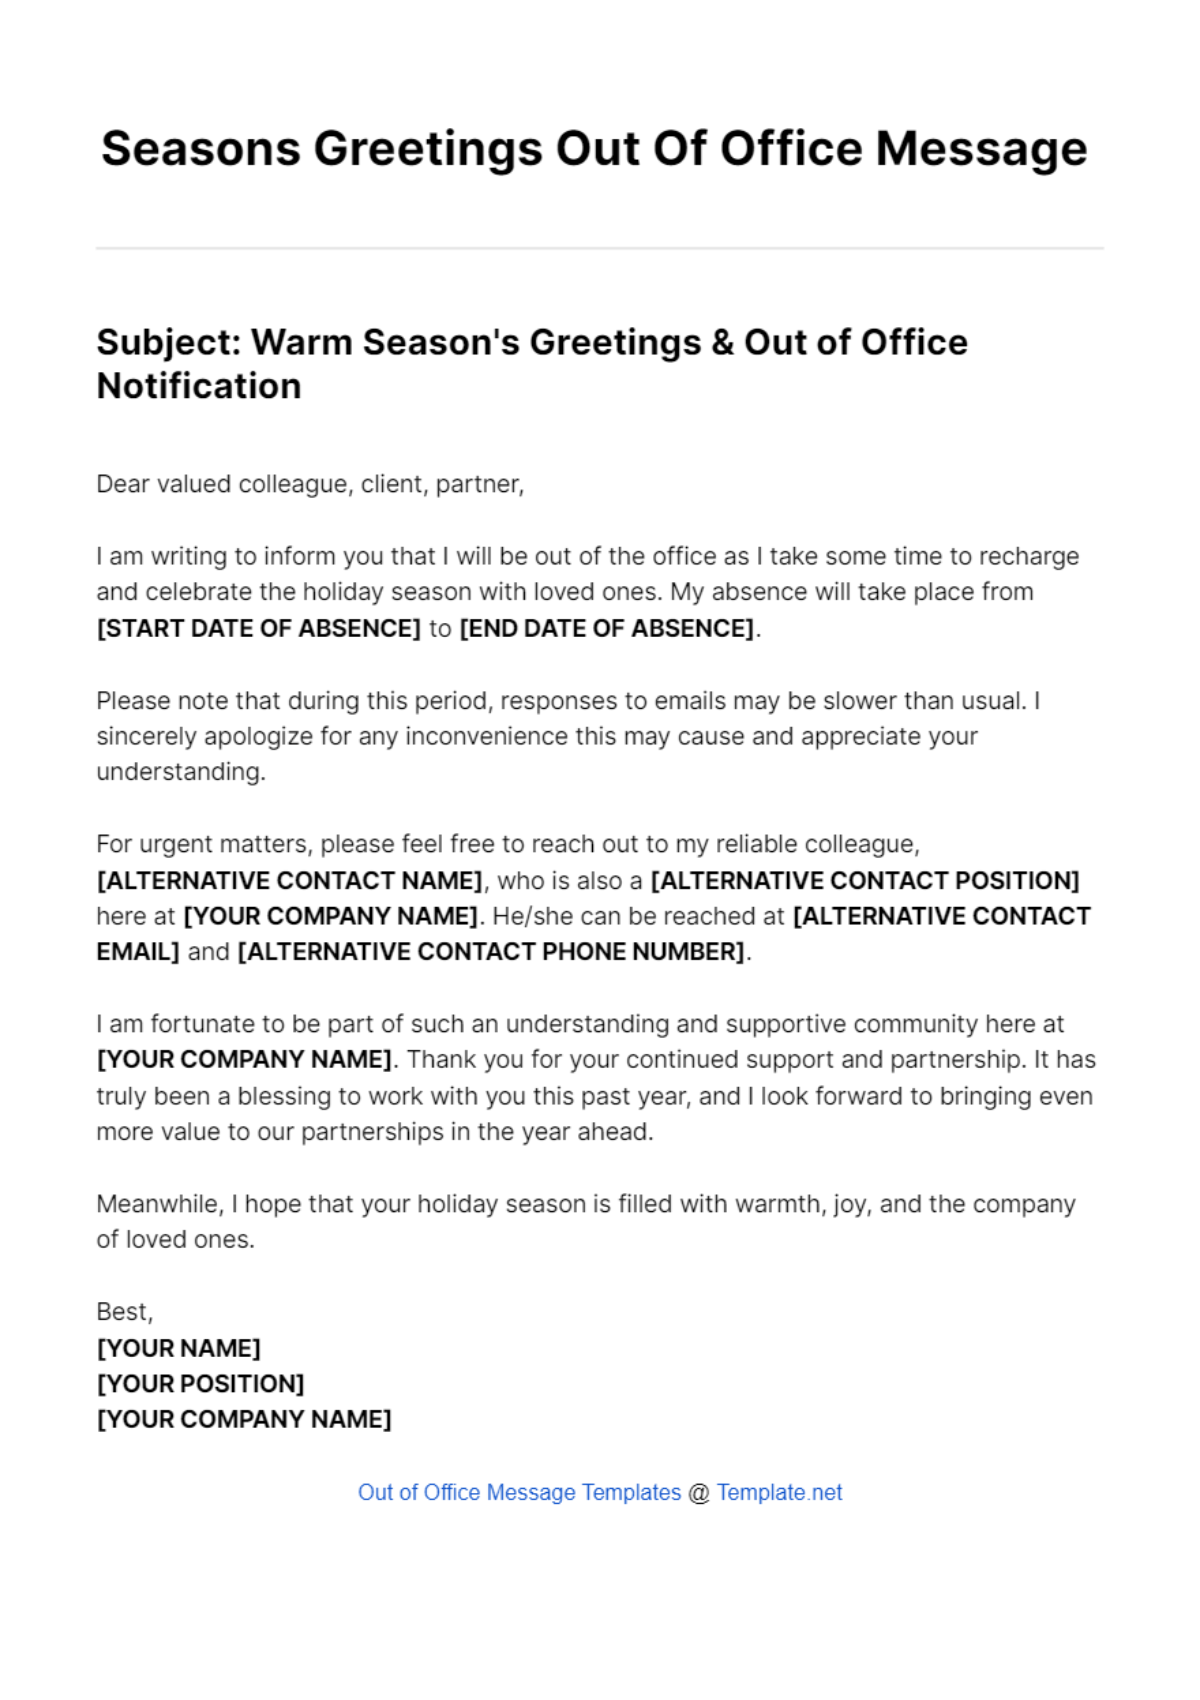 Free Seasons Greetings Out Of Office Message Template